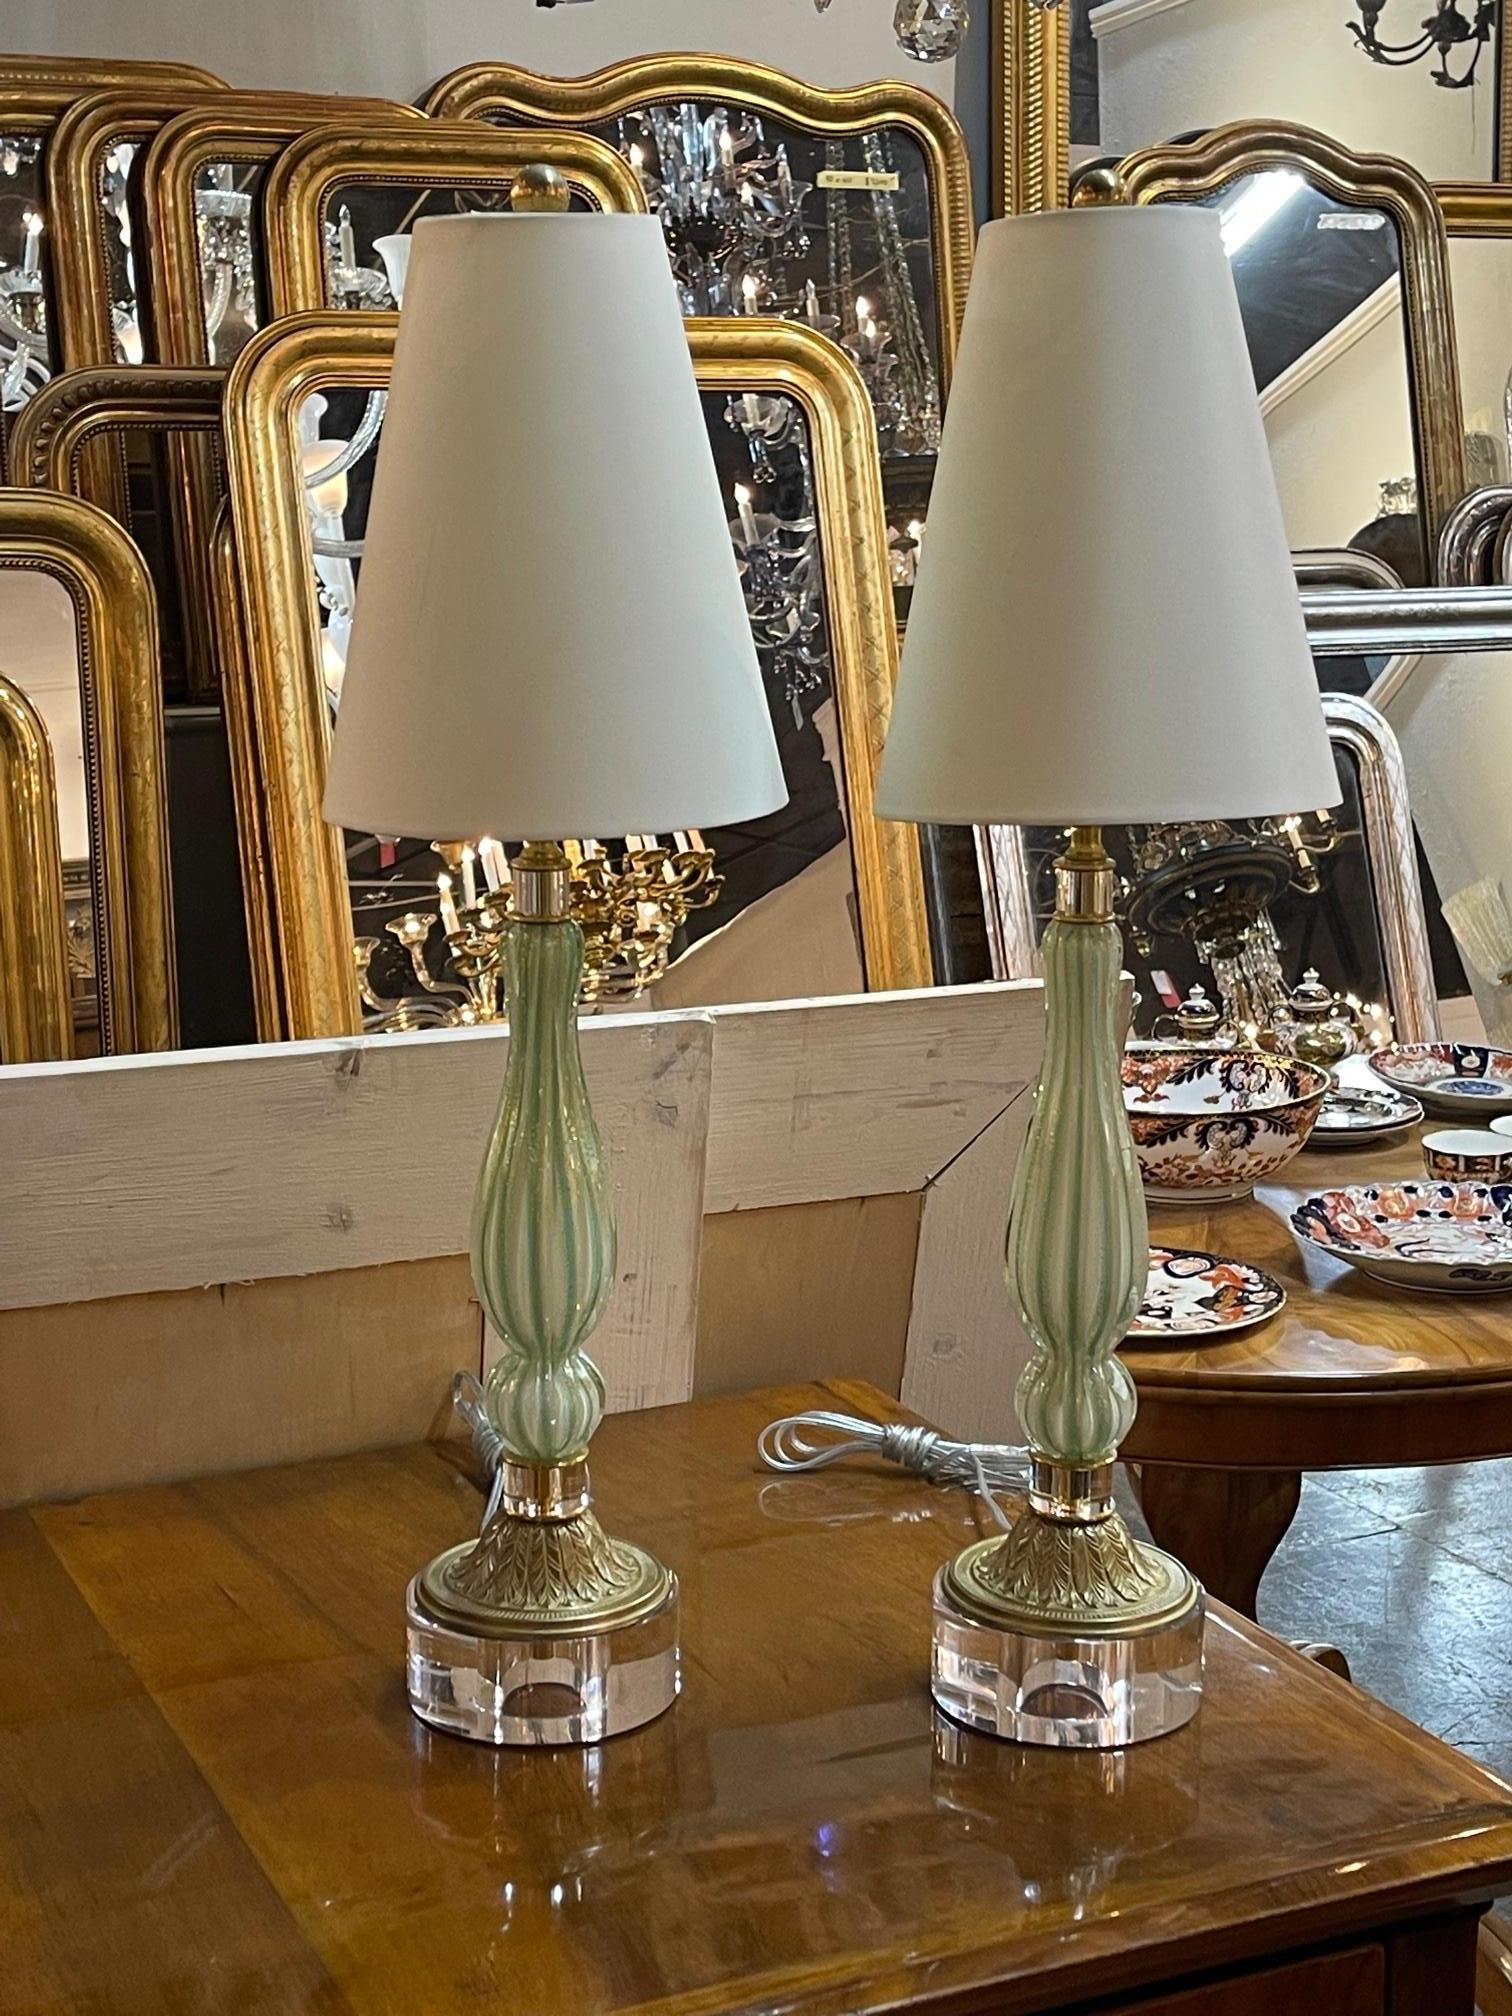 Great pair of vintage Murano glass mint and gold lamps. They are on a lucite and bronze base. These lamps have great lines and style. Sure to make a statement.